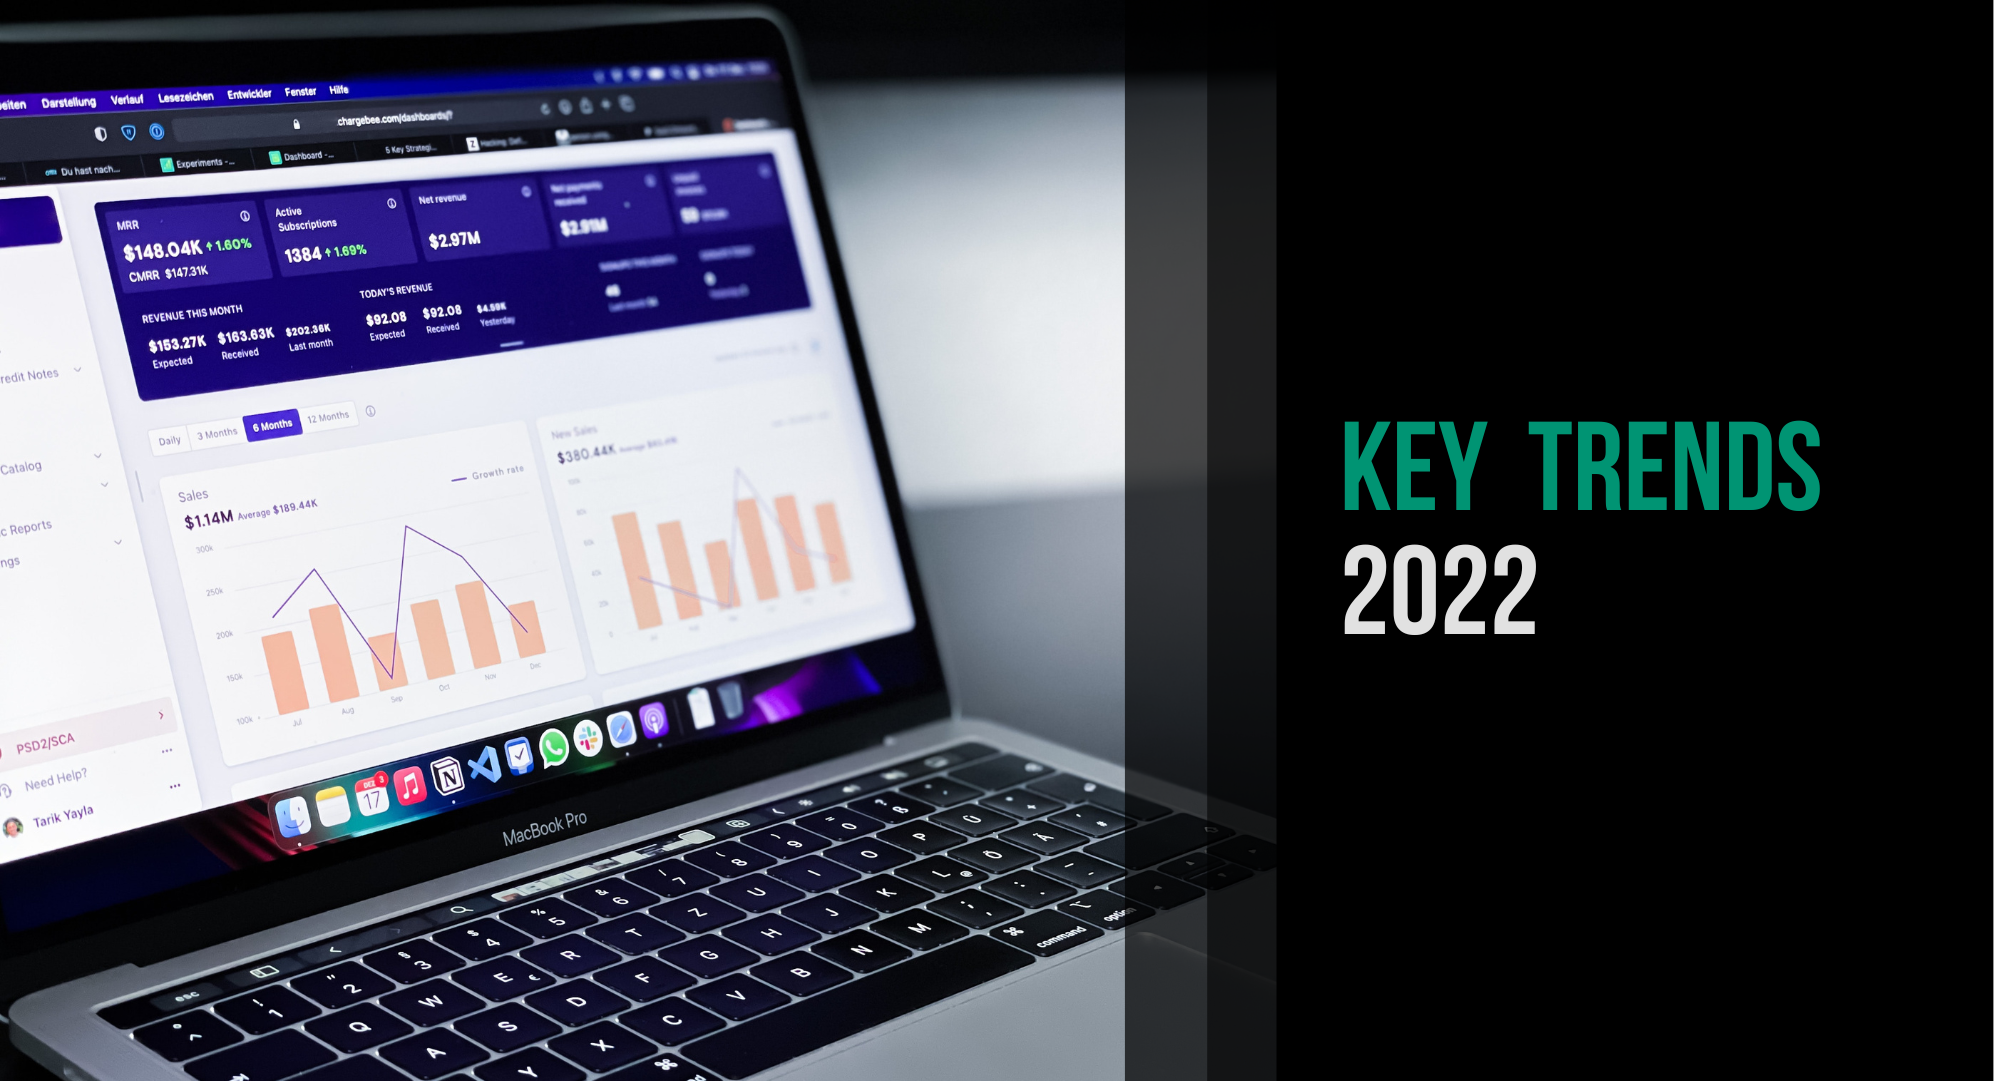 2022 key trends for ecommerce